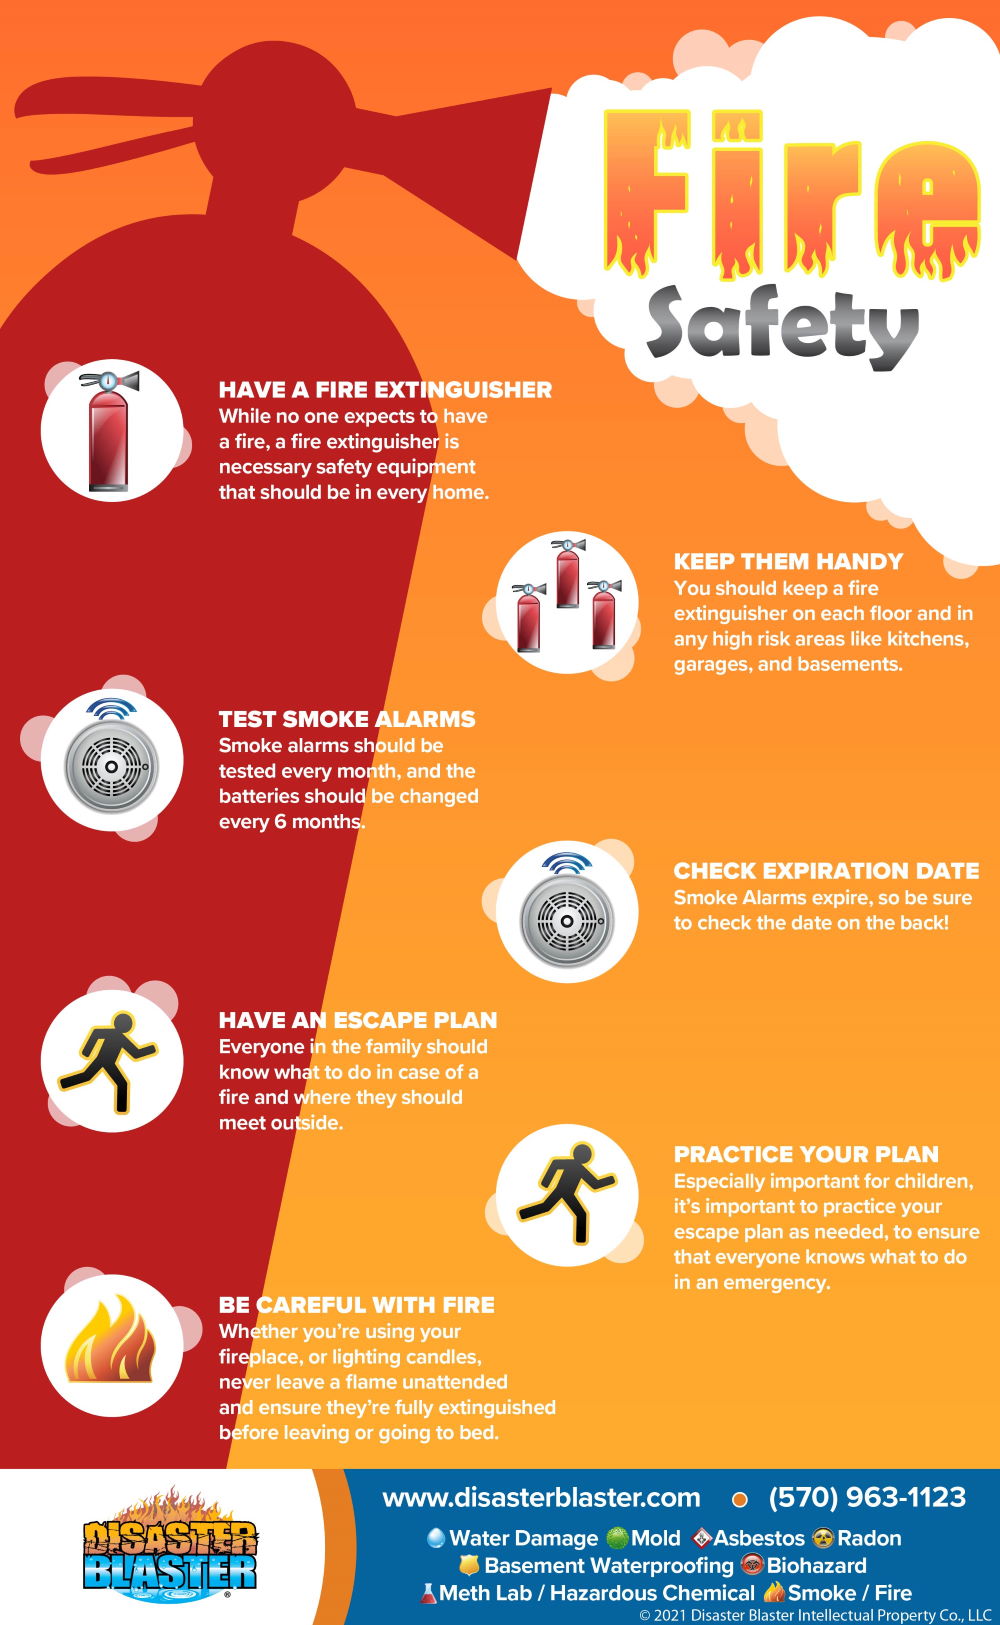 Fire Safety infographic